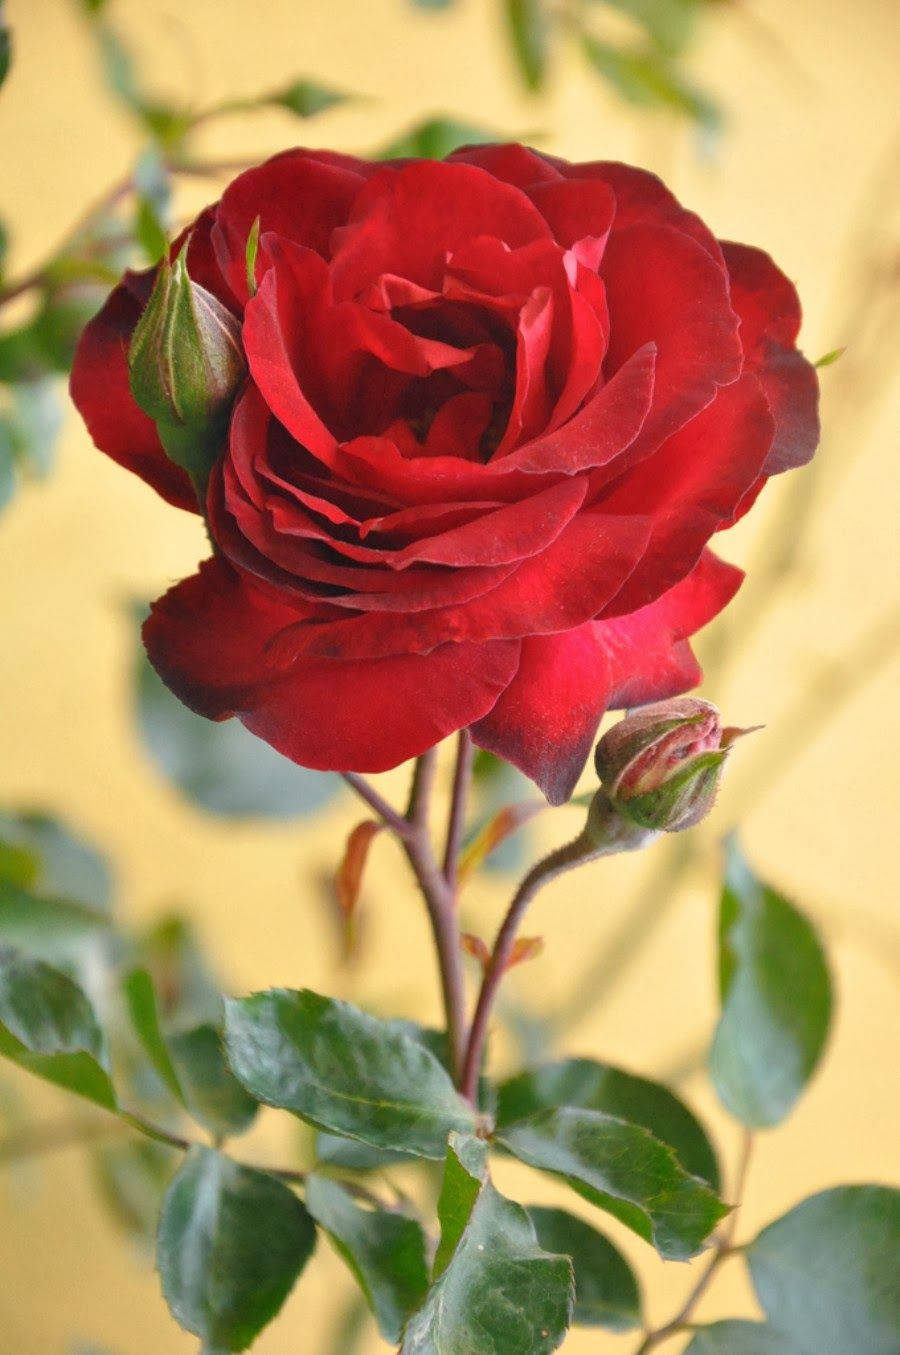 World's Most Beautiful Flowers Red Rose Wallpaper